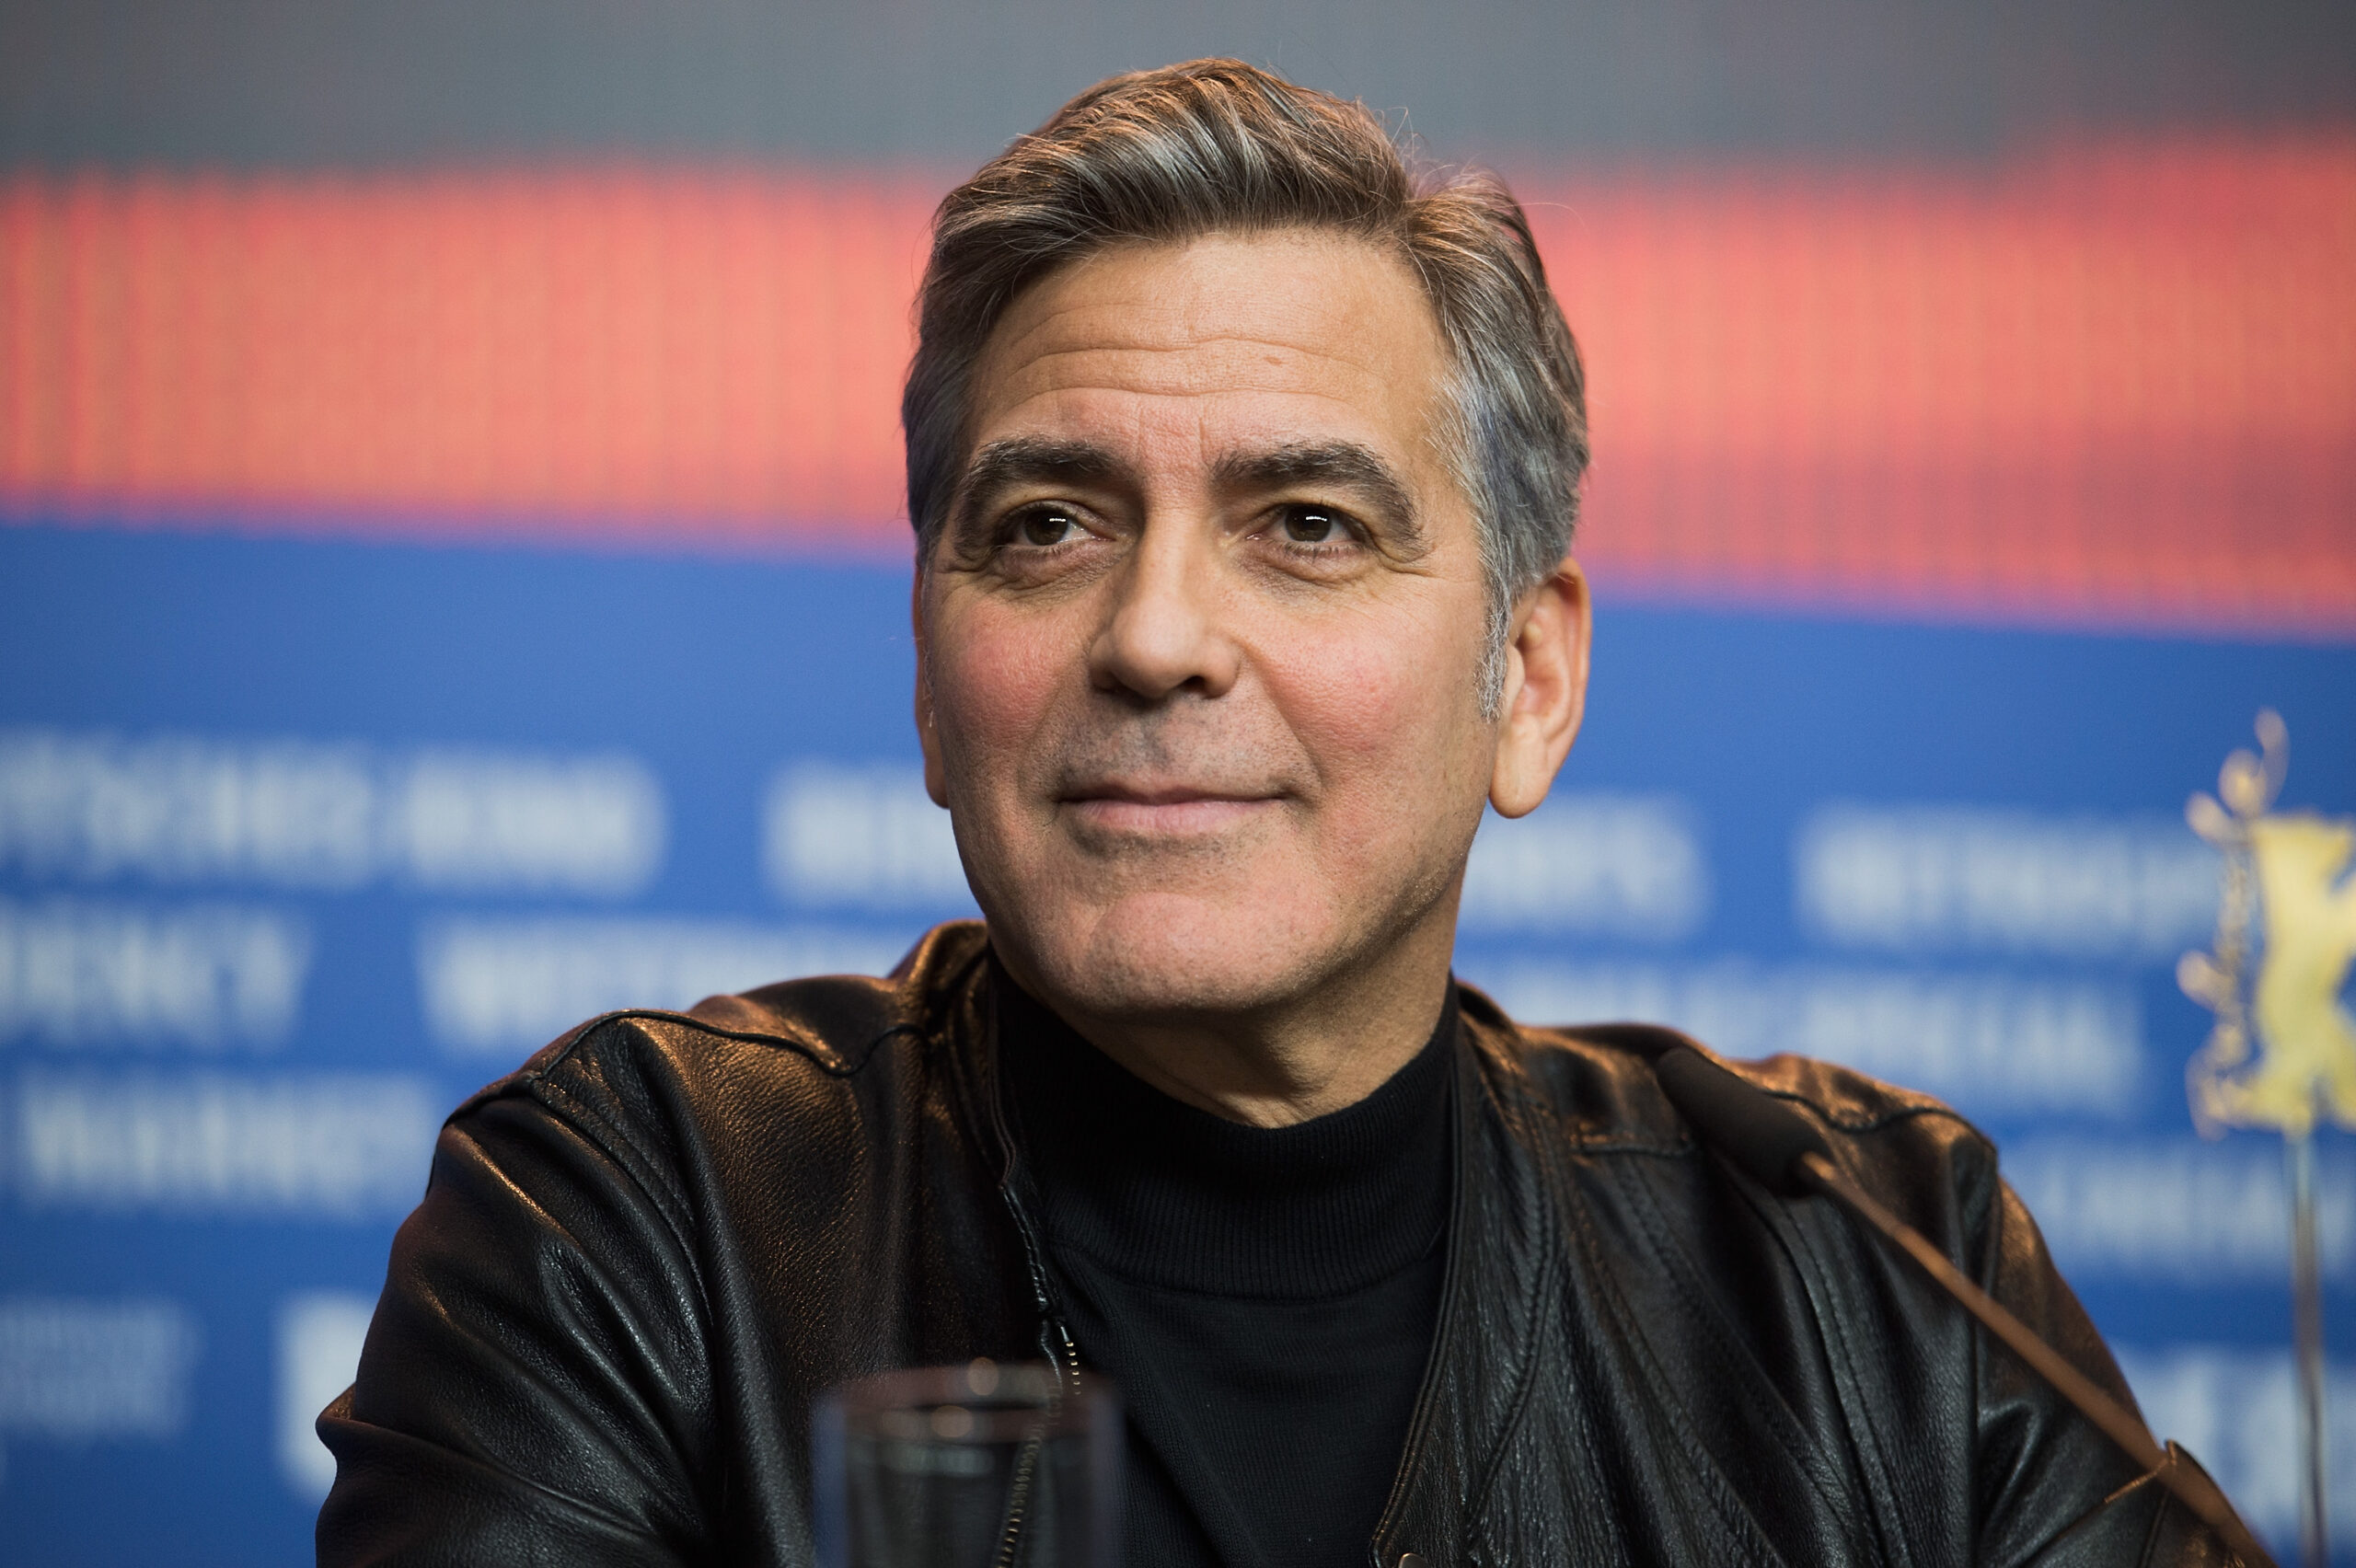 Actor George Clooney attends the "Hail, Caesar!" press conference during the 66th Berlinale International Film Festival Berlin at Grand Hyatt Hotel on February 11, 2016 in Berlin, Germany | Source: Getty Images